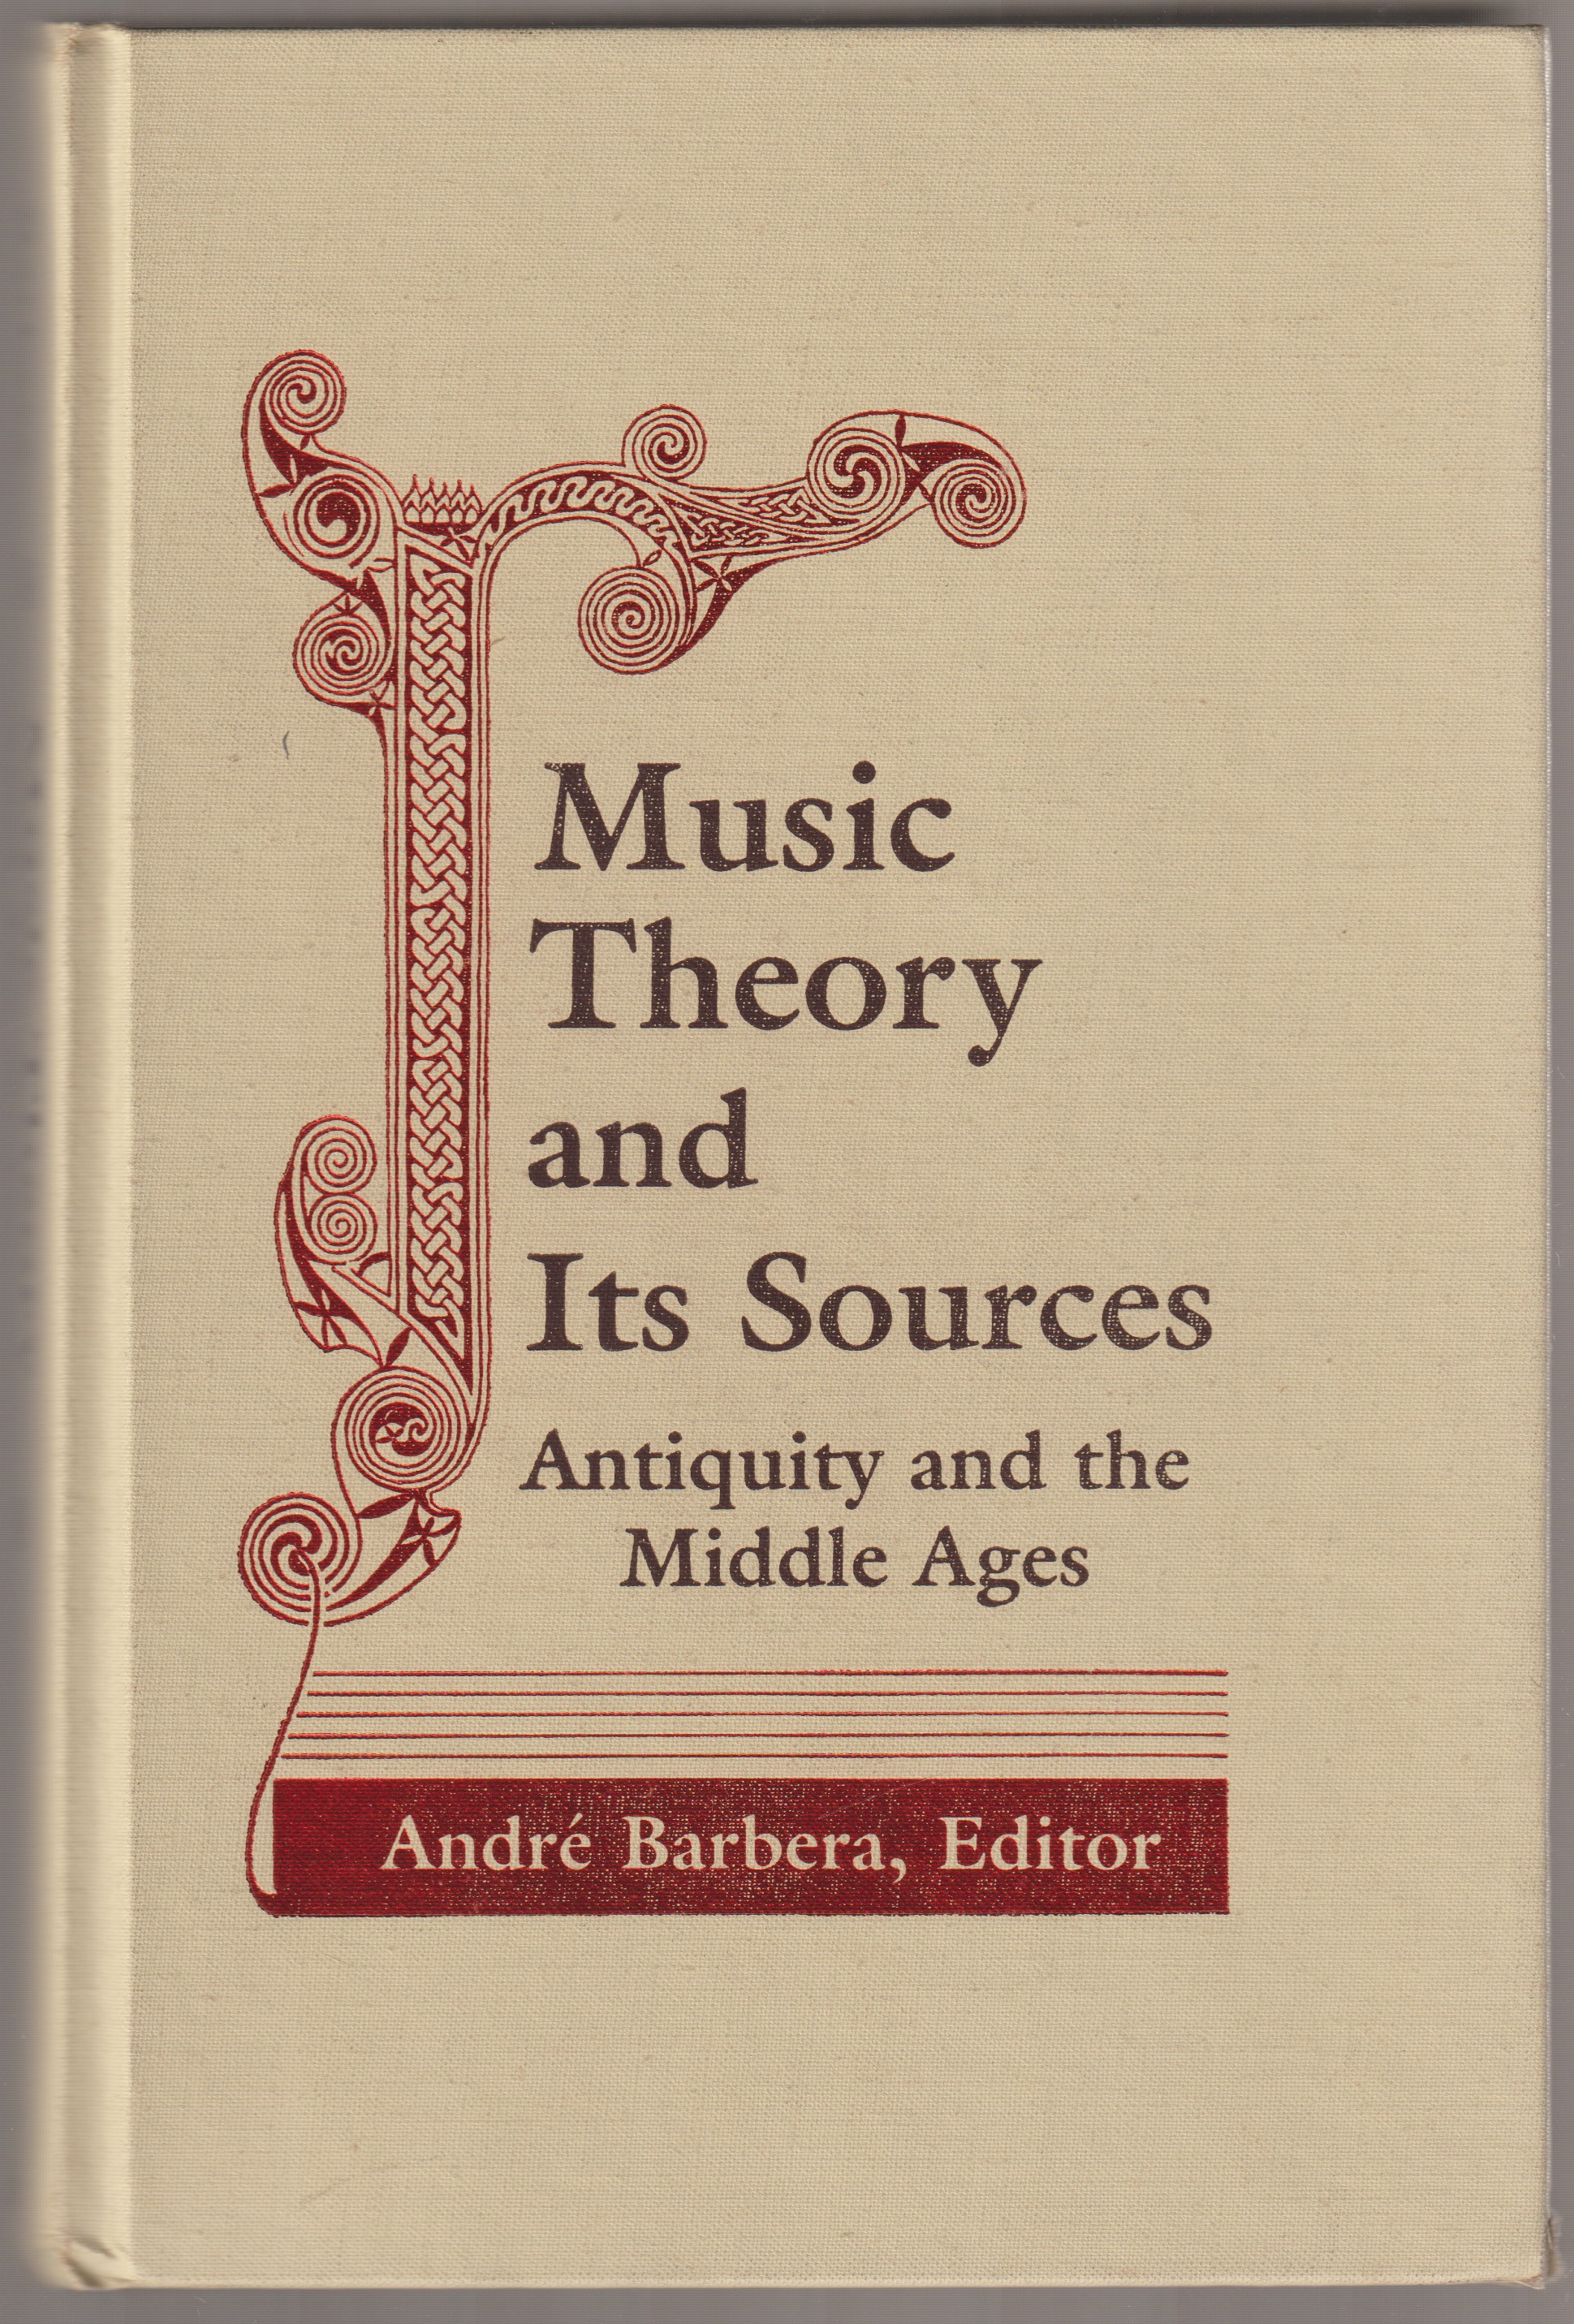 Music theory and its sources : antiquity and the Middle Ages.